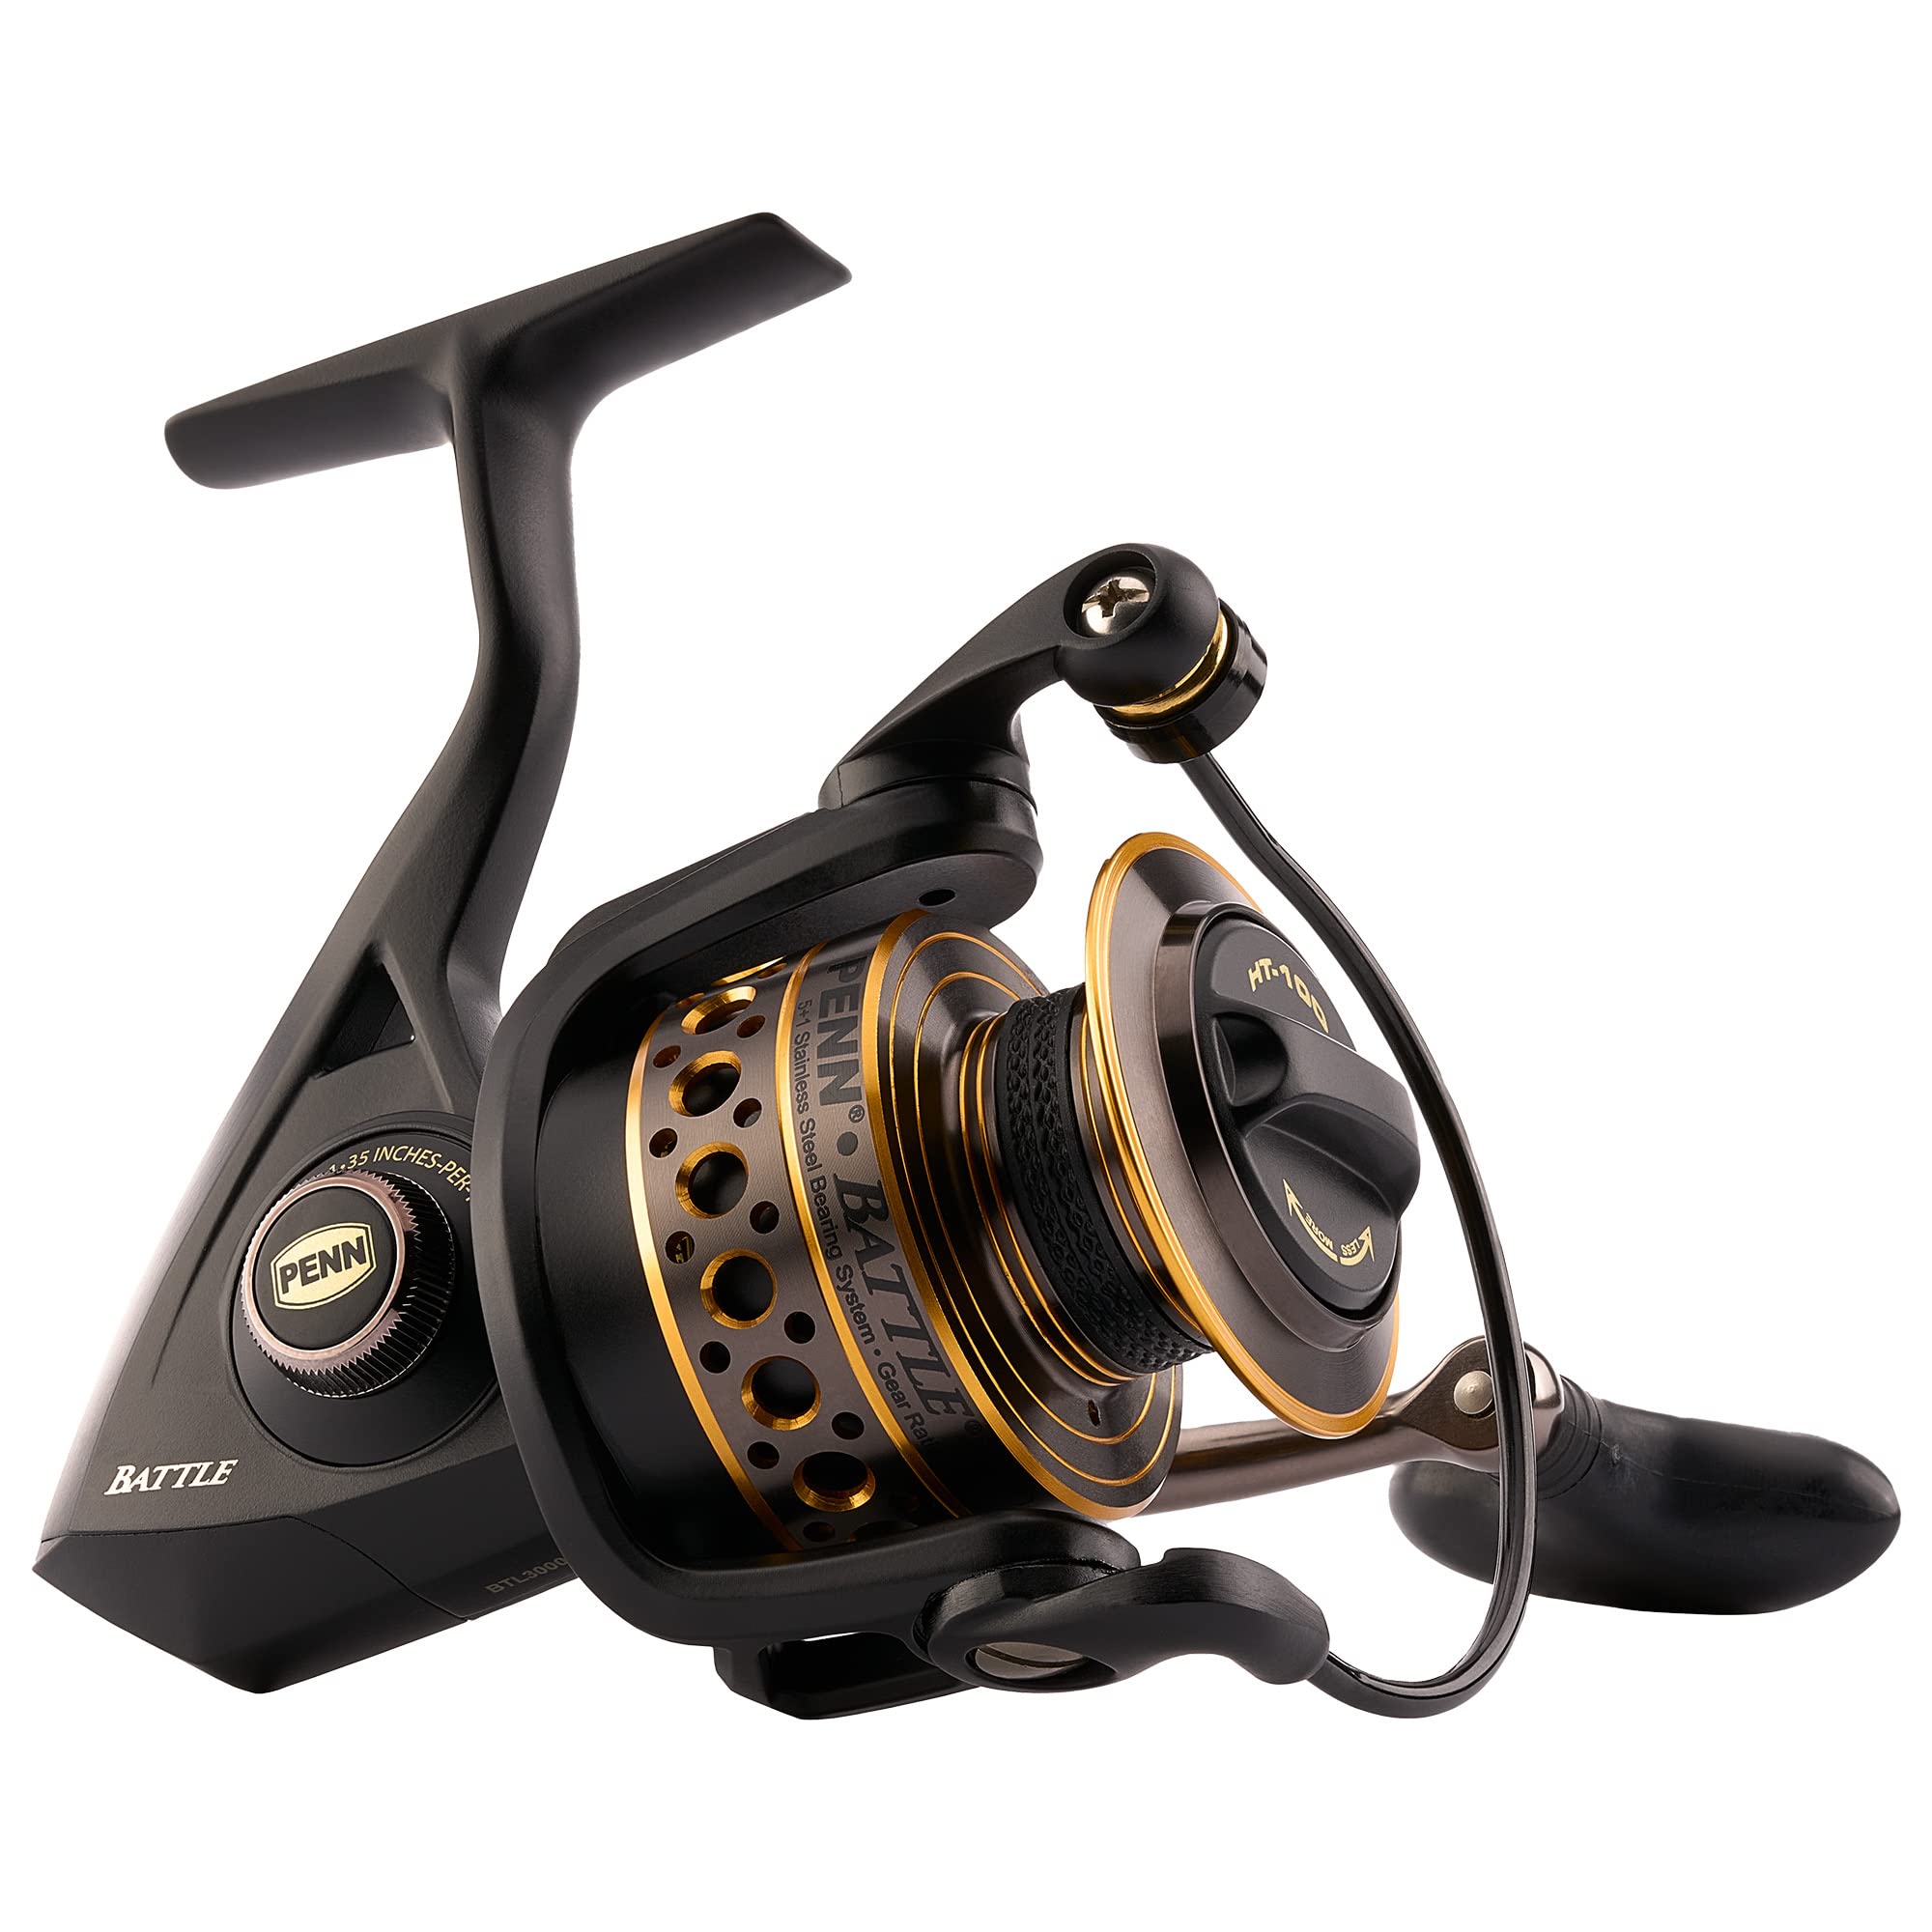 PENN Battle Spinning Reel Kit, Size 5000, Includes Reel Cover and